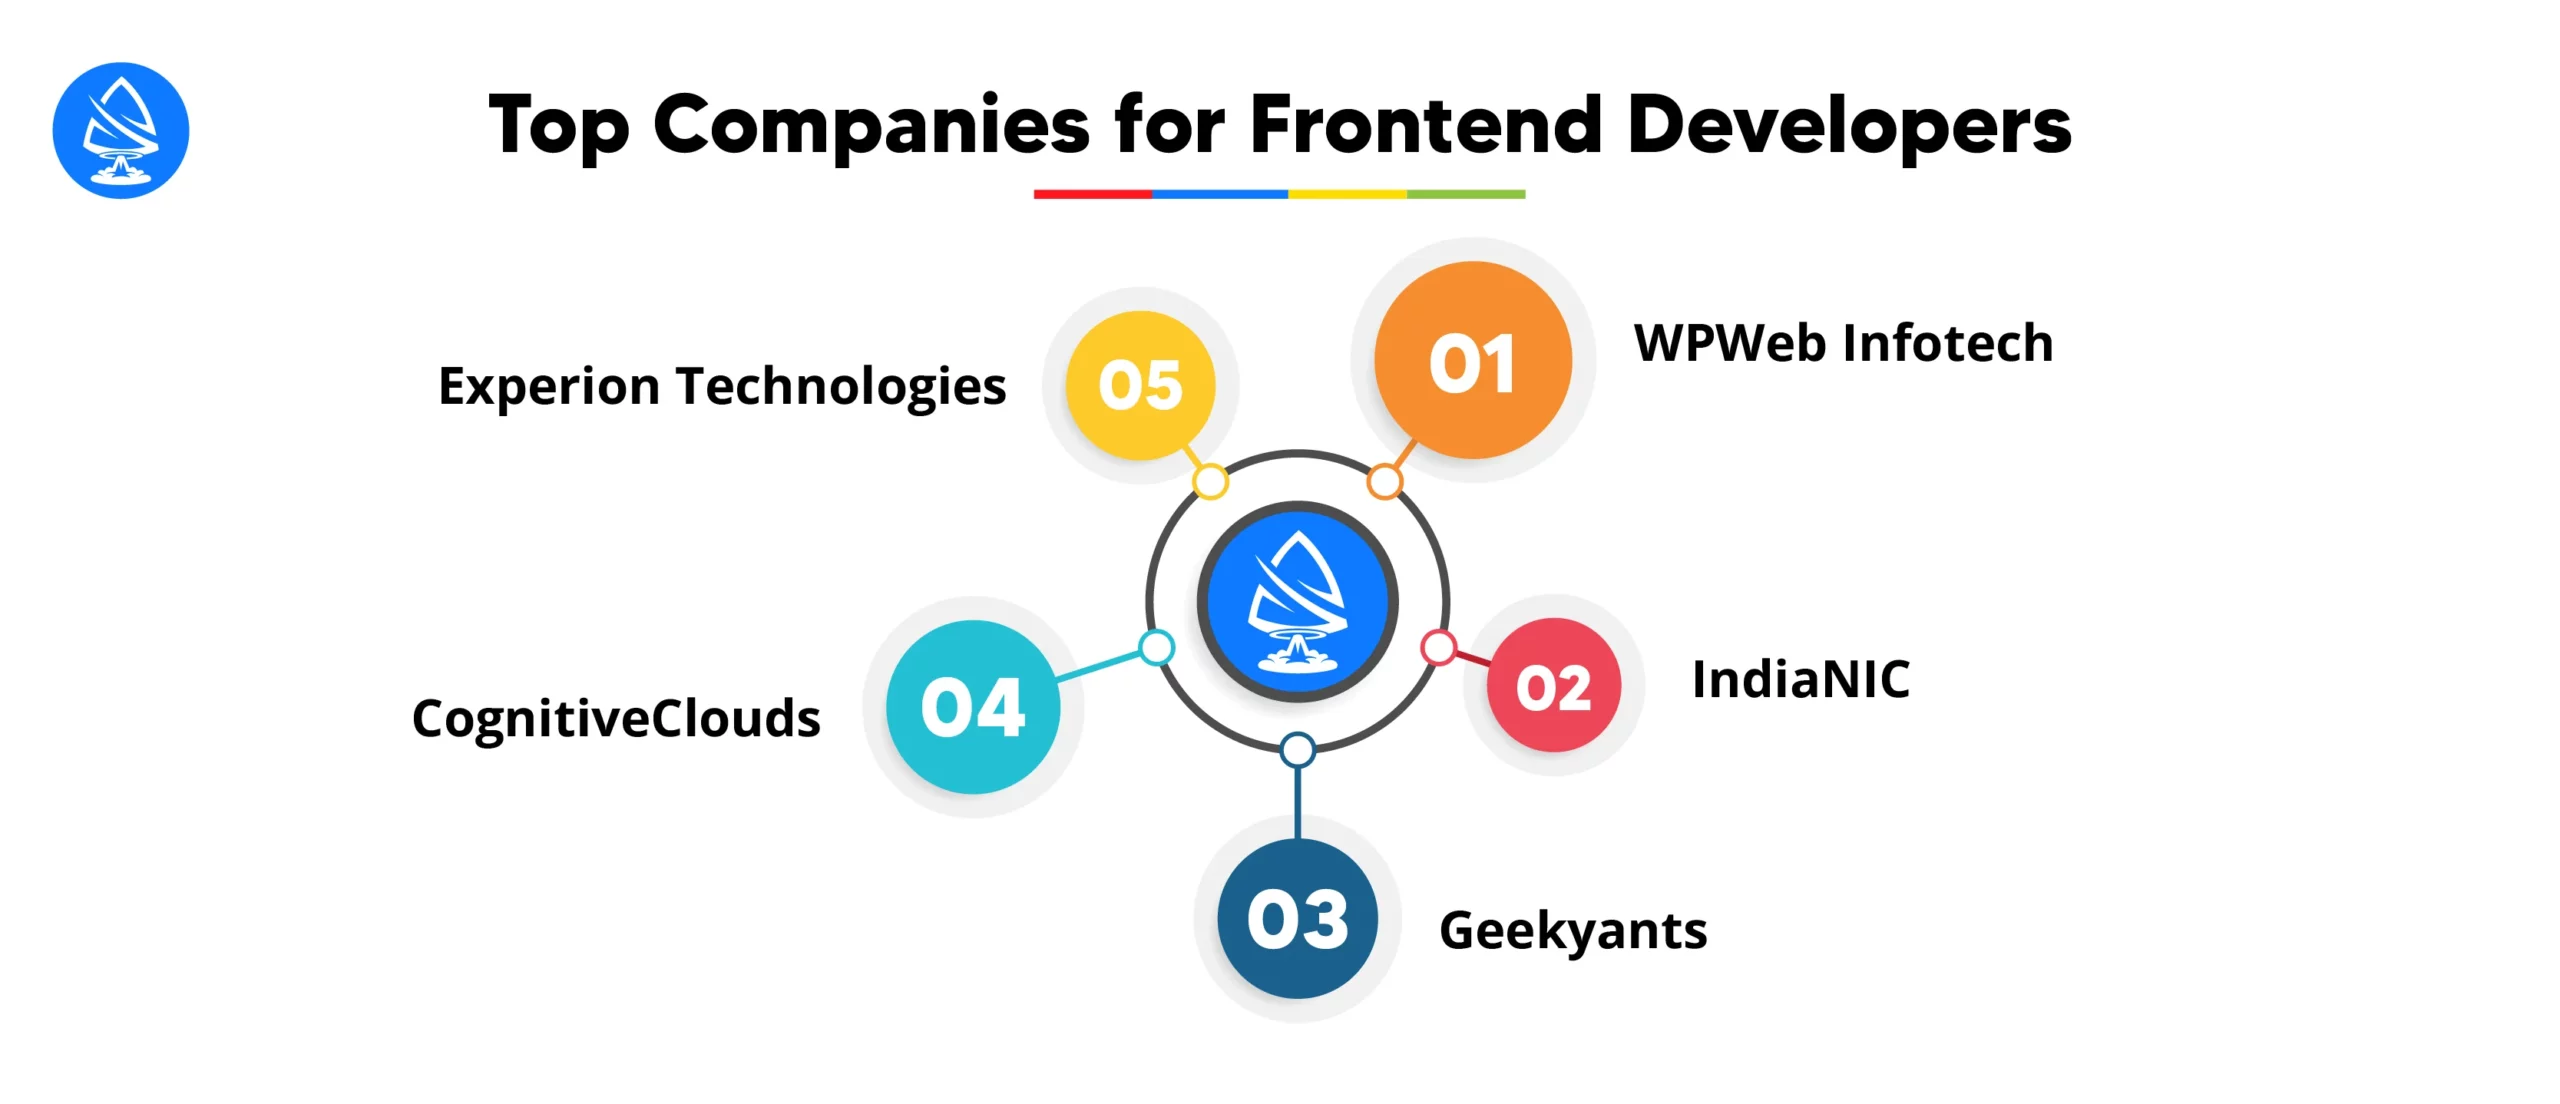 Top Companies for Frontend Developers in India